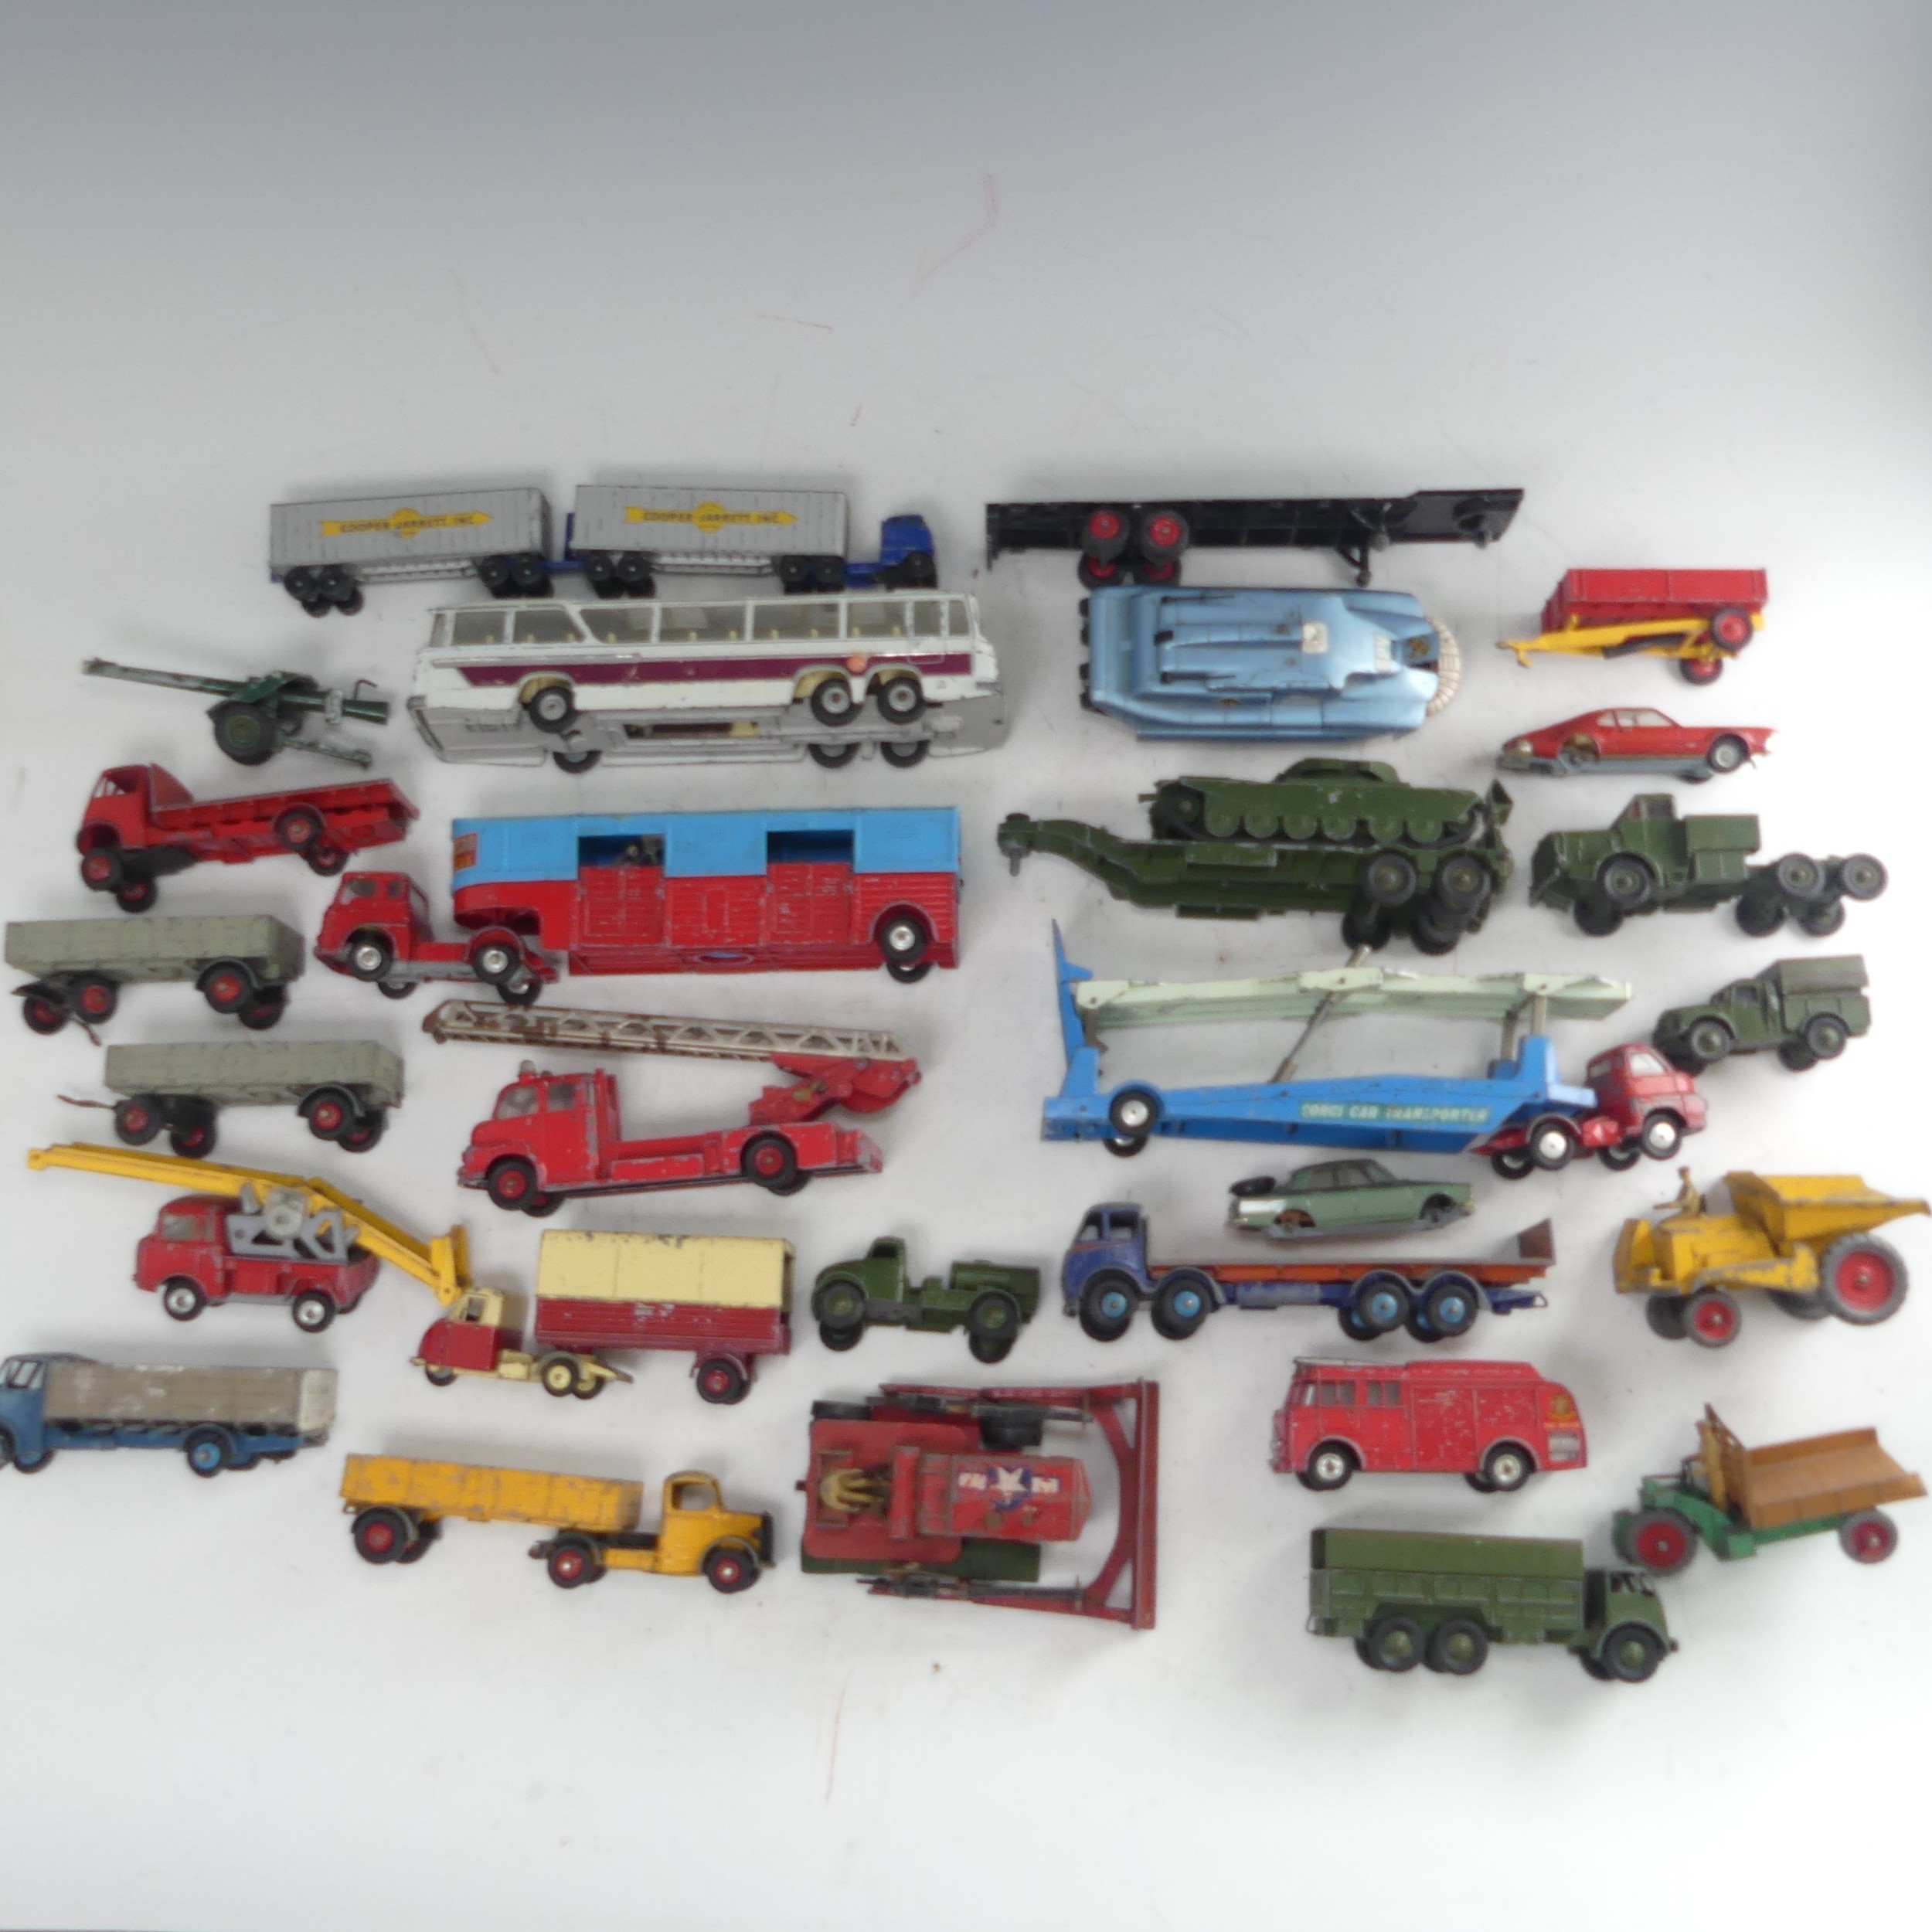 A collection of play-worn die-cast metal toy model cars, commercial and army vehicles, mostly - Image 3 of 3